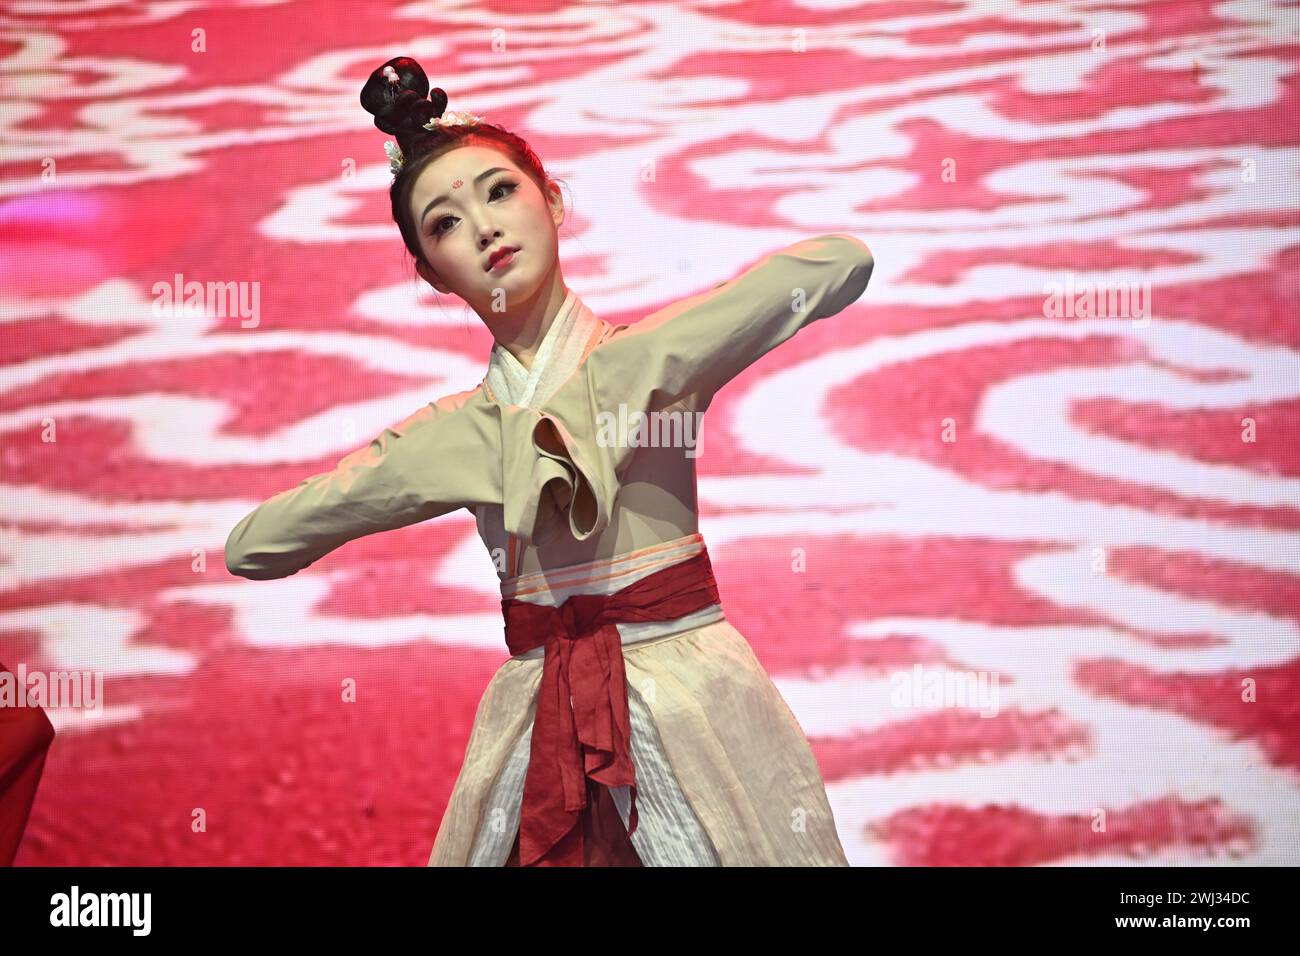 Trafalgar square, London, UK, 11 February 2024: Chinese sleeve dance preforms at the 2024 Lunar New Year a spectacular show this year for the 2024 Lunar New Year, with the CPC sponsoring the entire performances that comes from Beijing and Guangzhou. The Lunar New Year is also known as Chinese New Year or Spring Festival. The Chinese celebration in London attracted thousands of people. Experience traditional dragon and flying lion dances and fun-filled stage performances from China, including Beijing opera and acrobatics, martial arts displays, and ancient magic in London, UK. Stock Photo